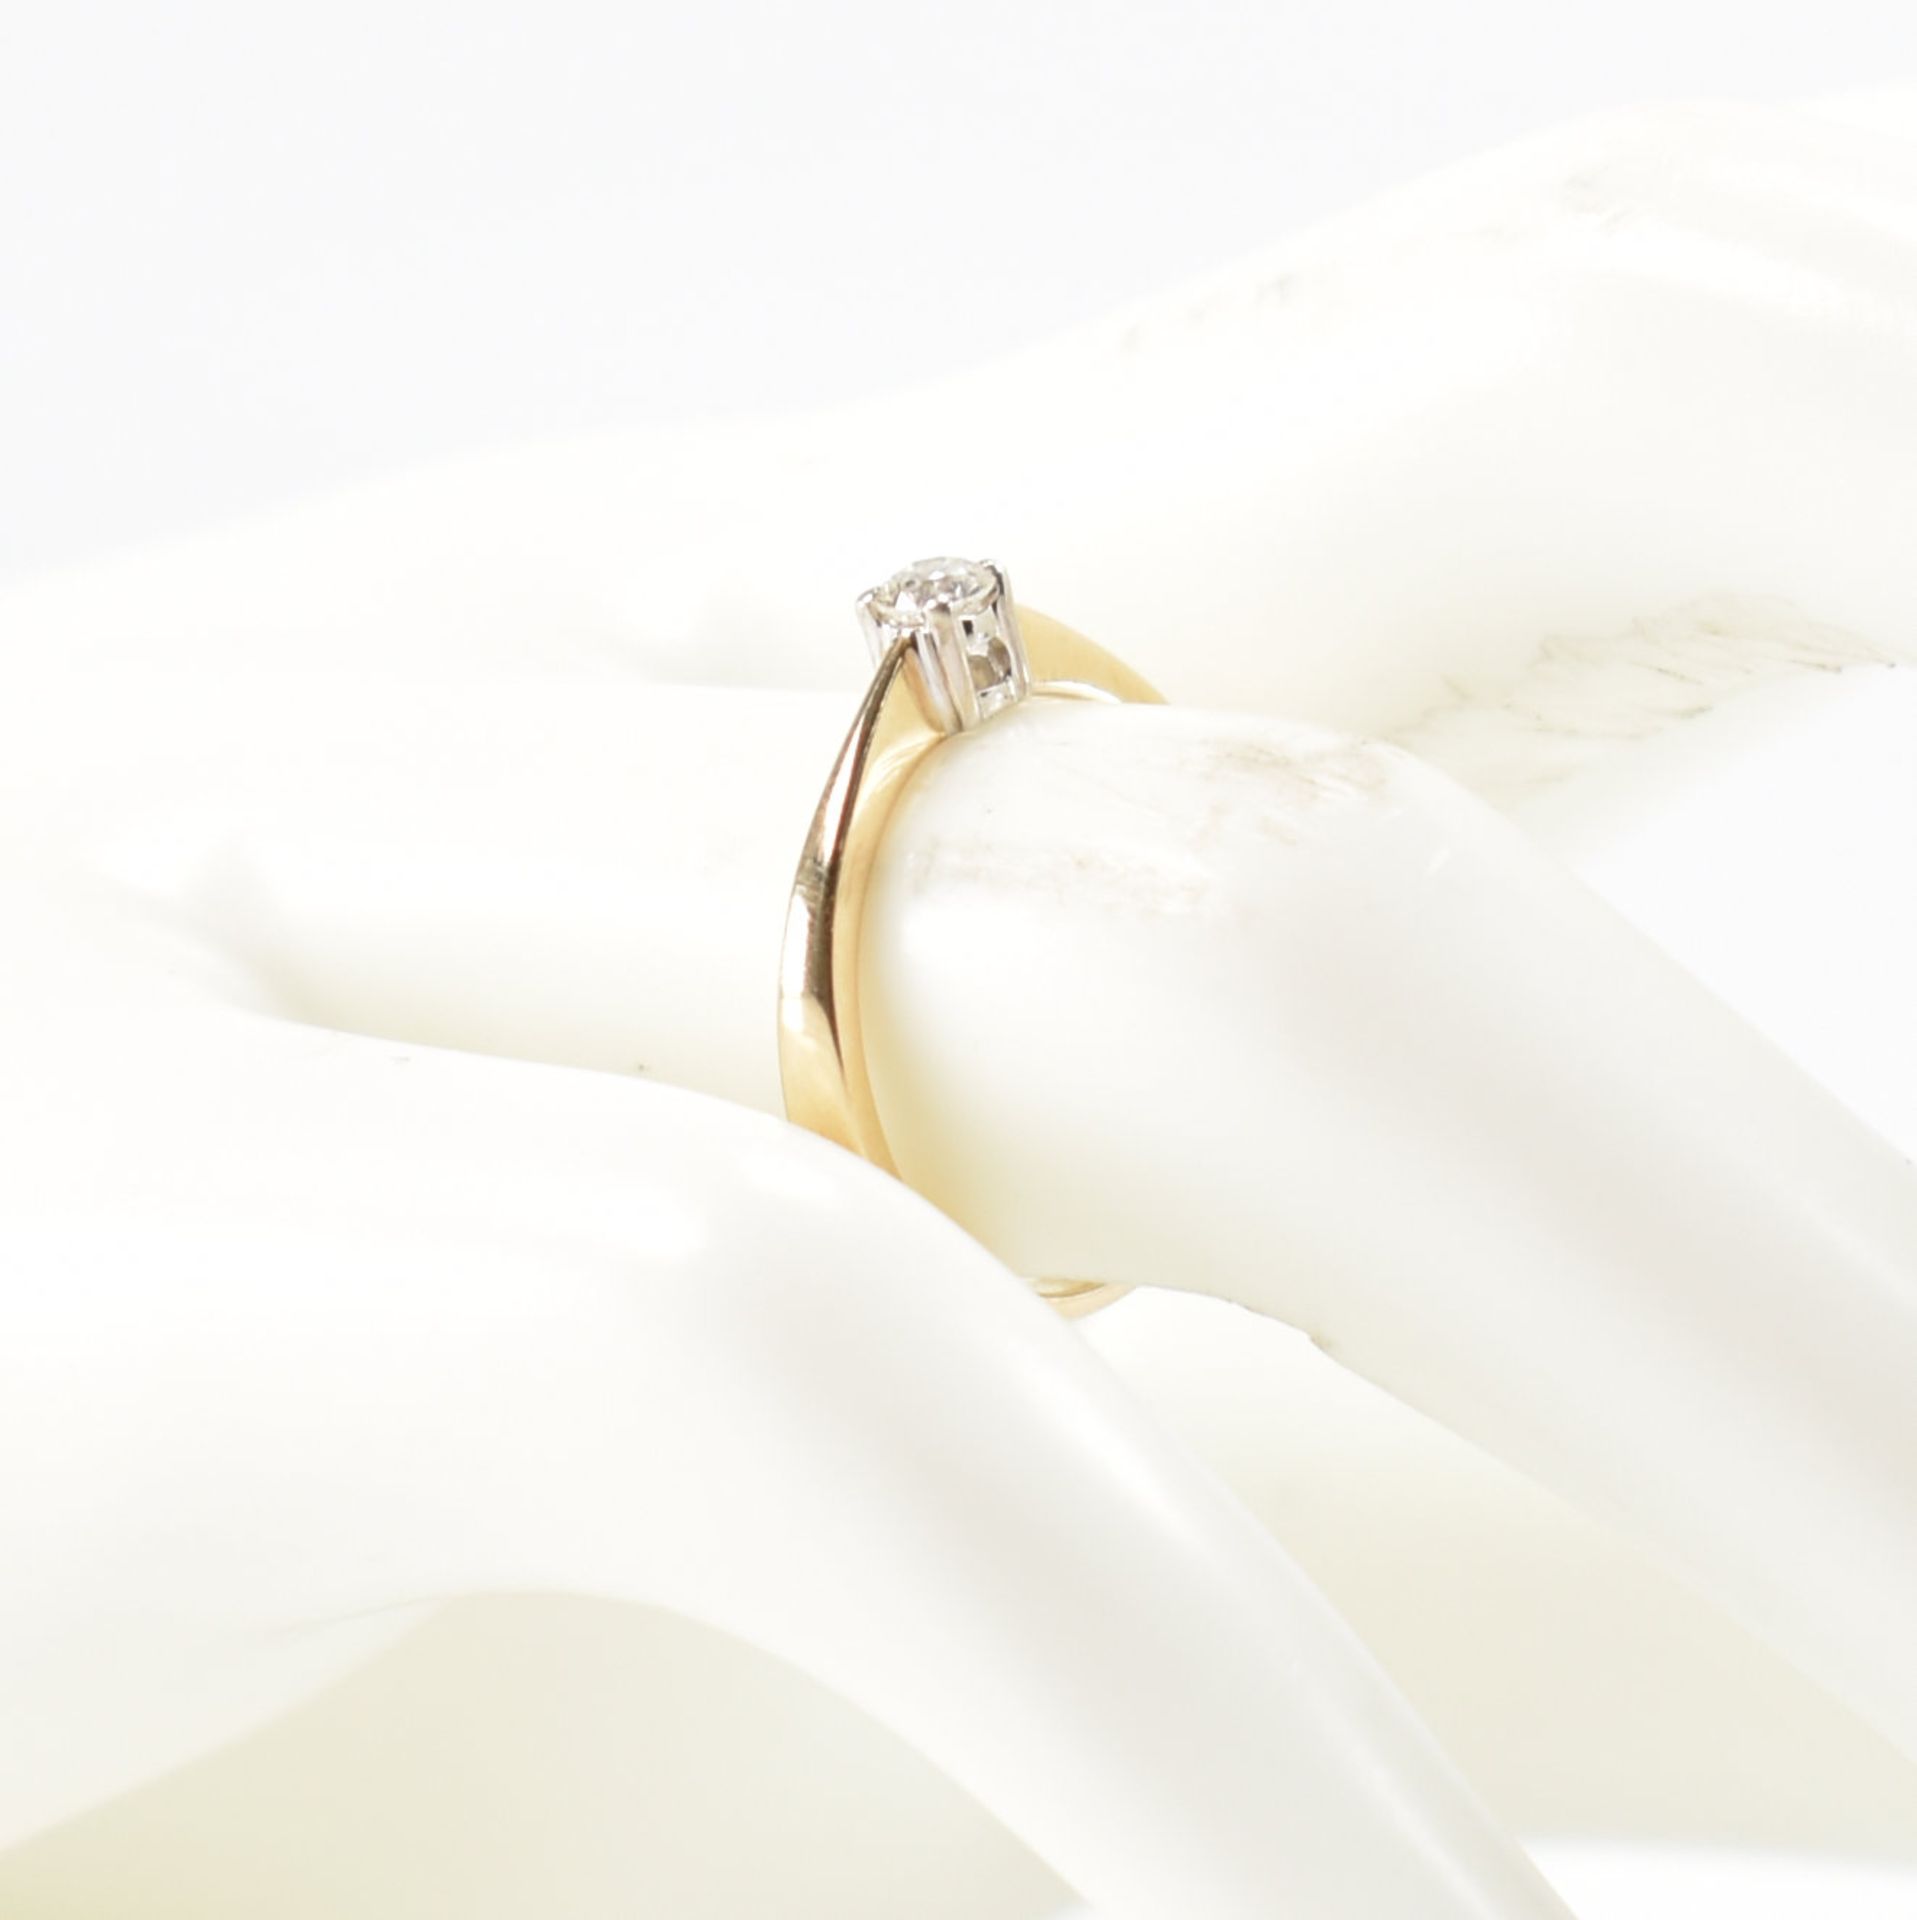 HALLMARKED 9CT GOLD & DIAMOND SOLITAIRE RING - Image 8 of 8